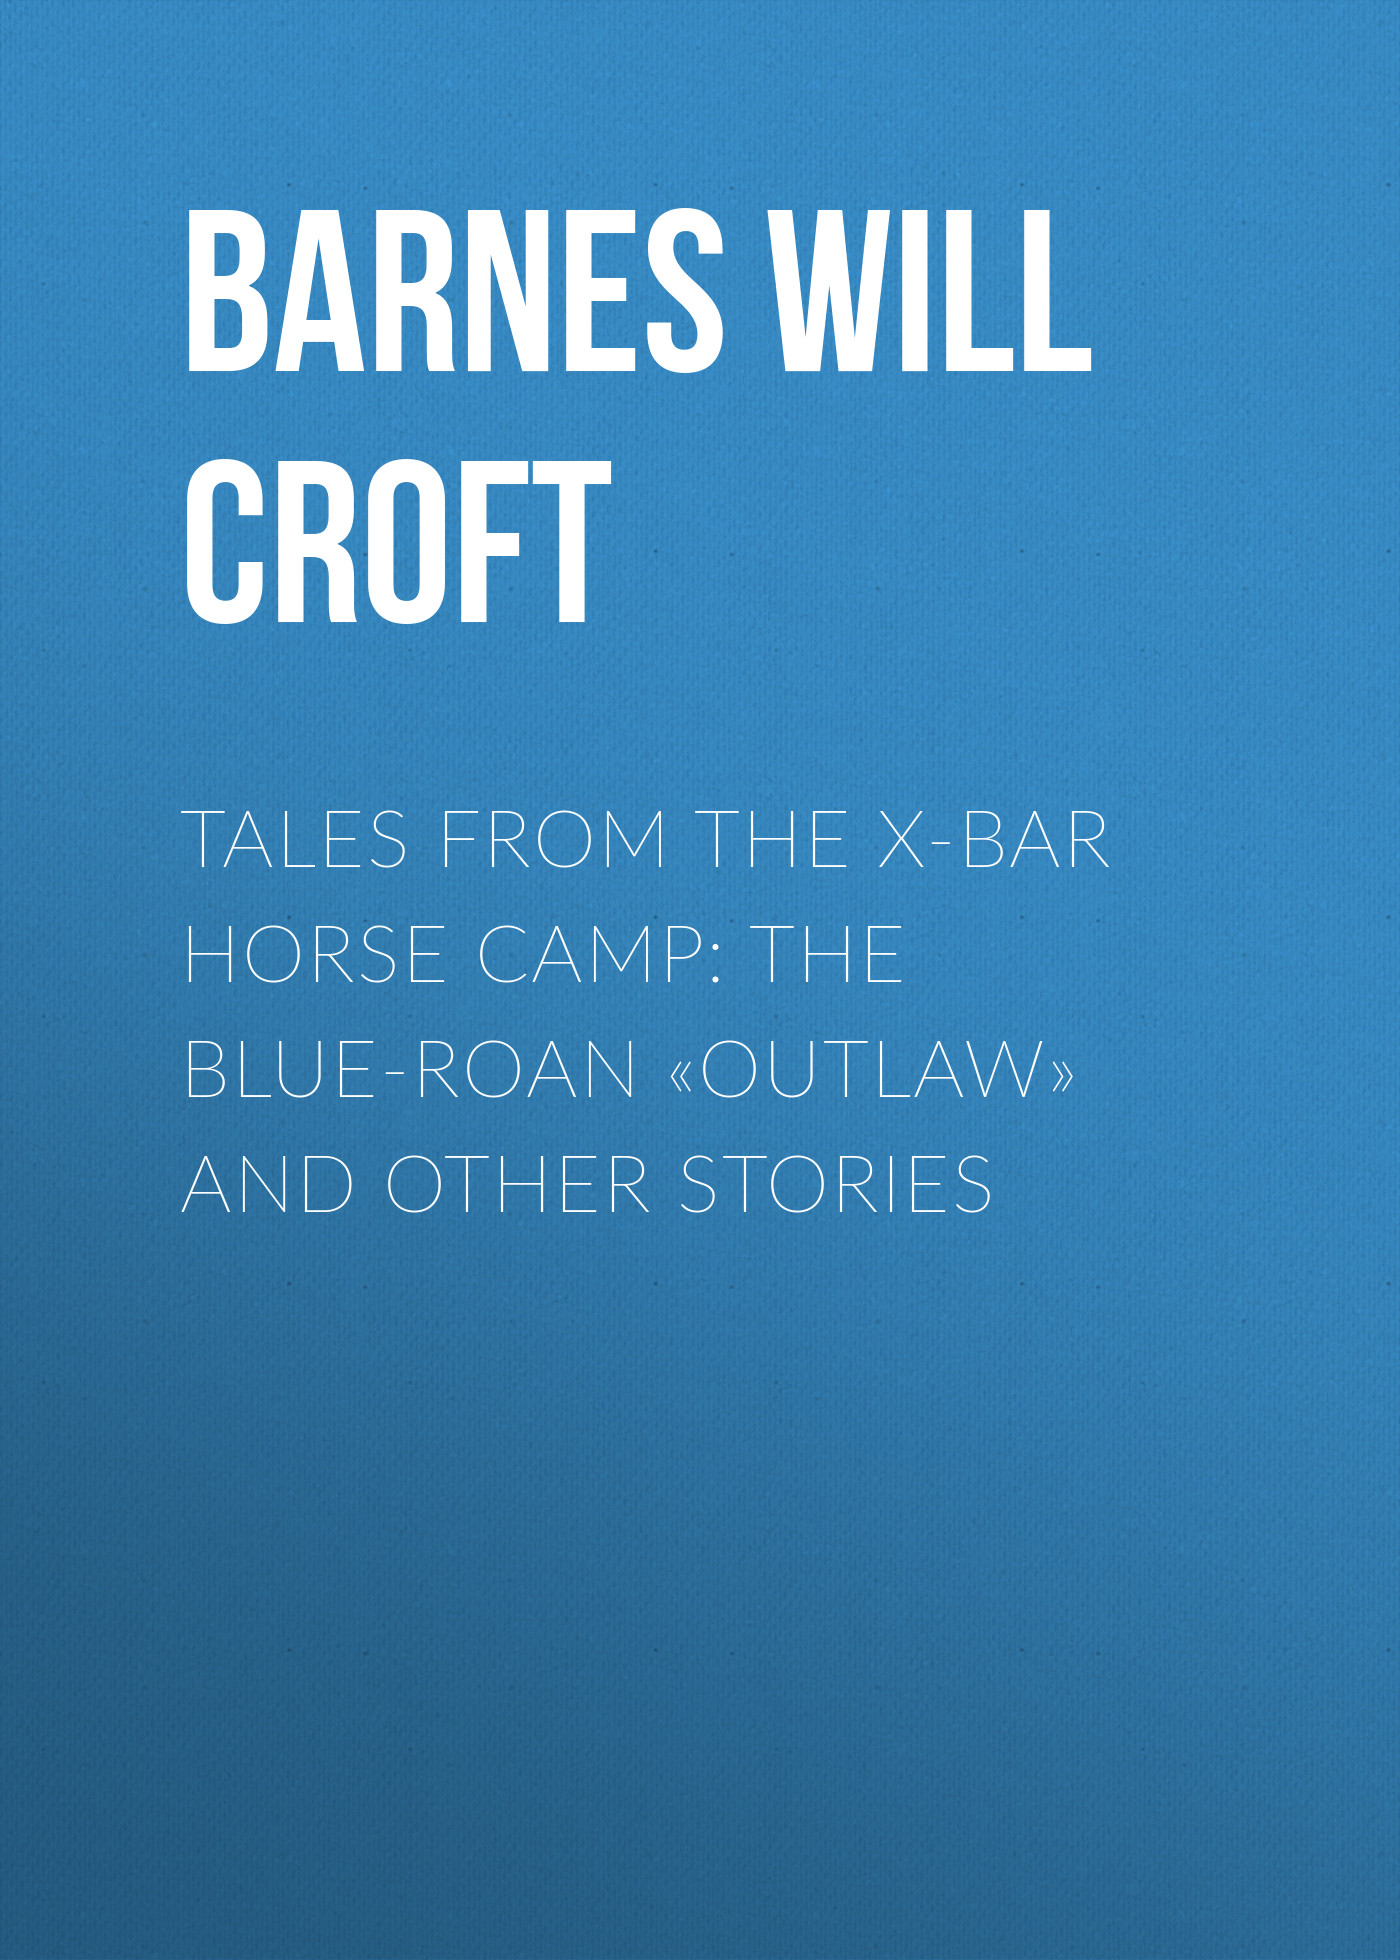 Tales from the X-bar Horse Camp: The Blue-Roan«Outlaw» and Other Stories